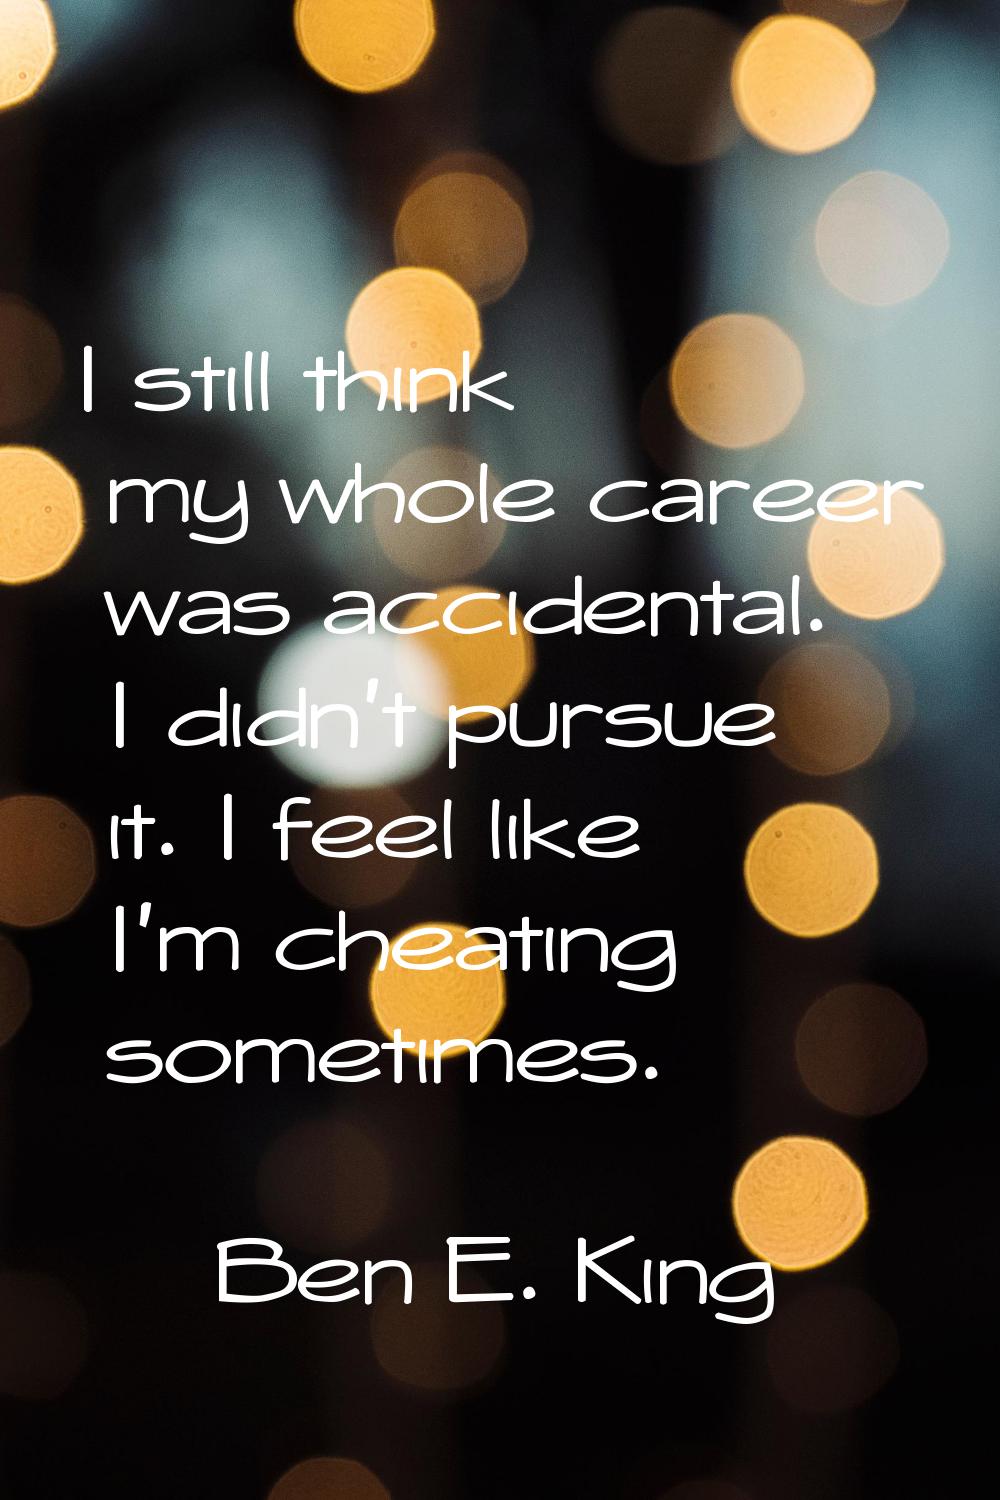 I still think my whole career was accidental. I didn't pursue it. I feel like I'm cheating sometime